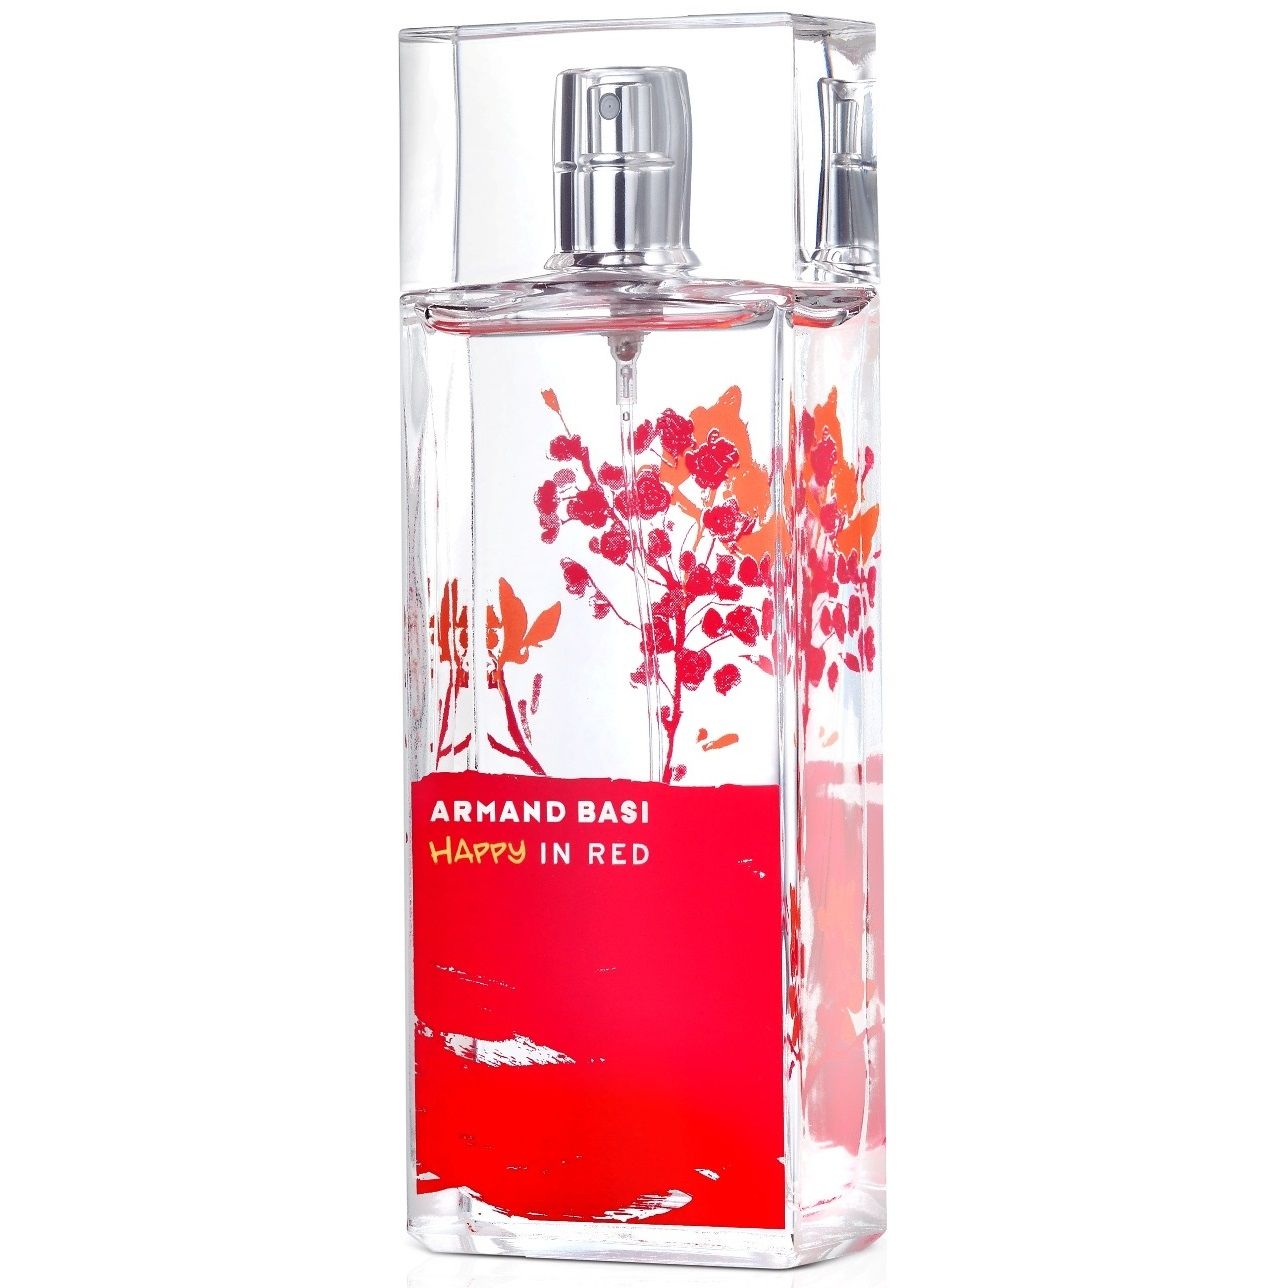 Духи cherry blossom. In Red Armand basi, 100ml, EDT. Armand basi in Red w EDT 50 ml. Armand basi in Red EDT (50 мл). Armand basi Happy in Red 50ml.